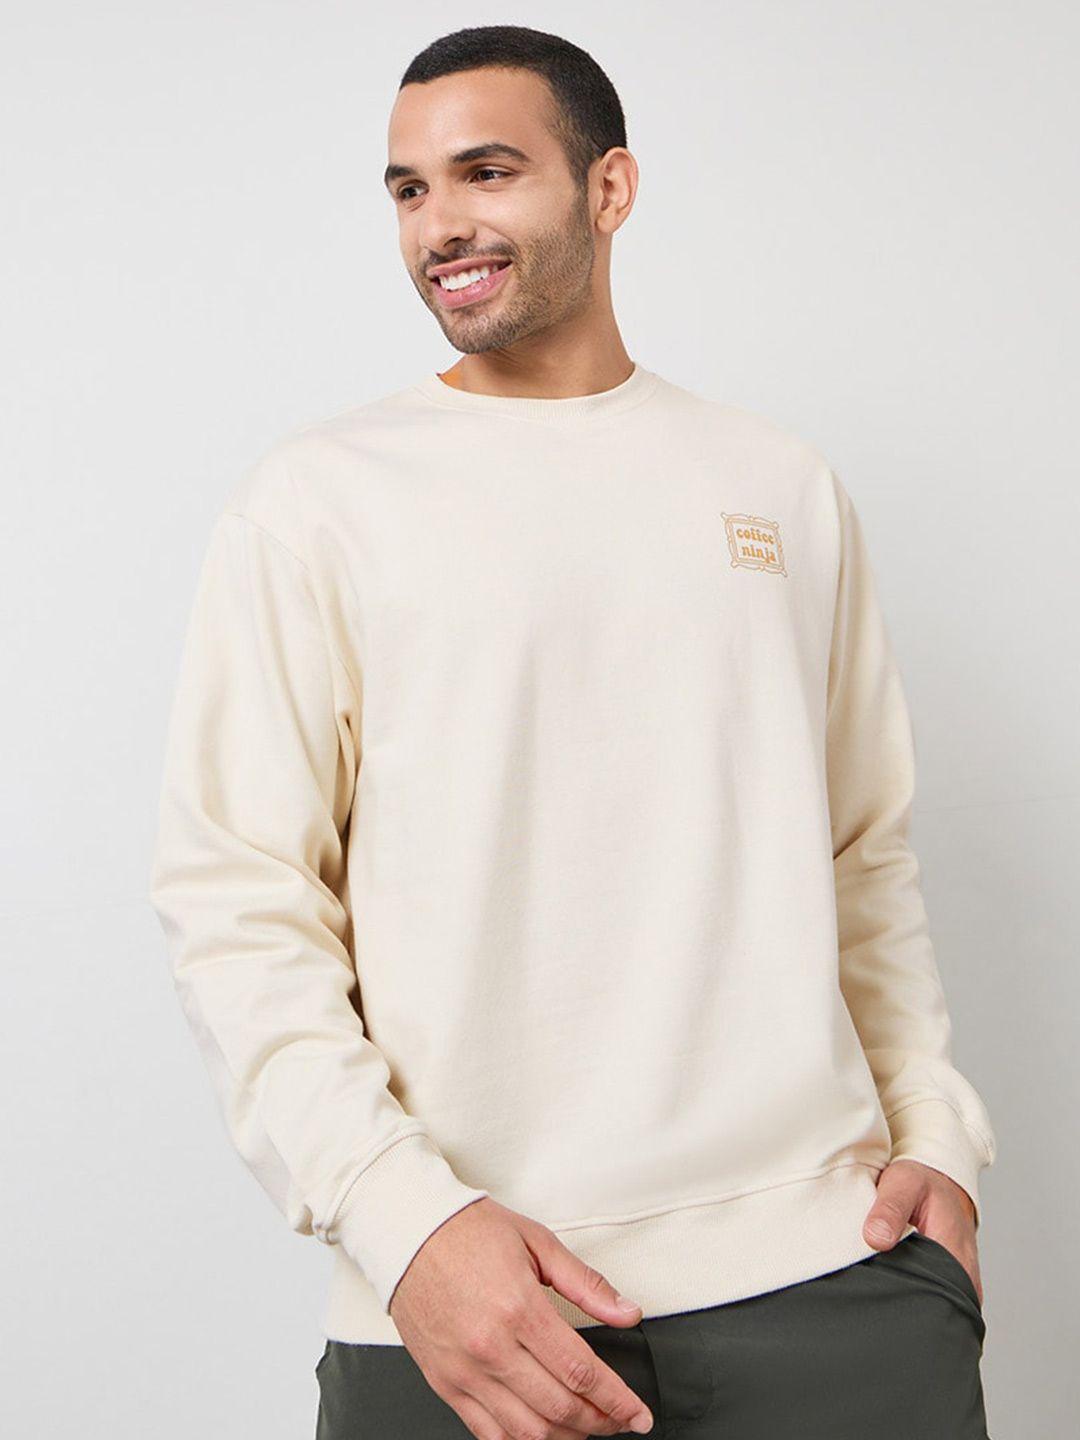 styli printed detail pure cotton relaxed fit sweatshirt